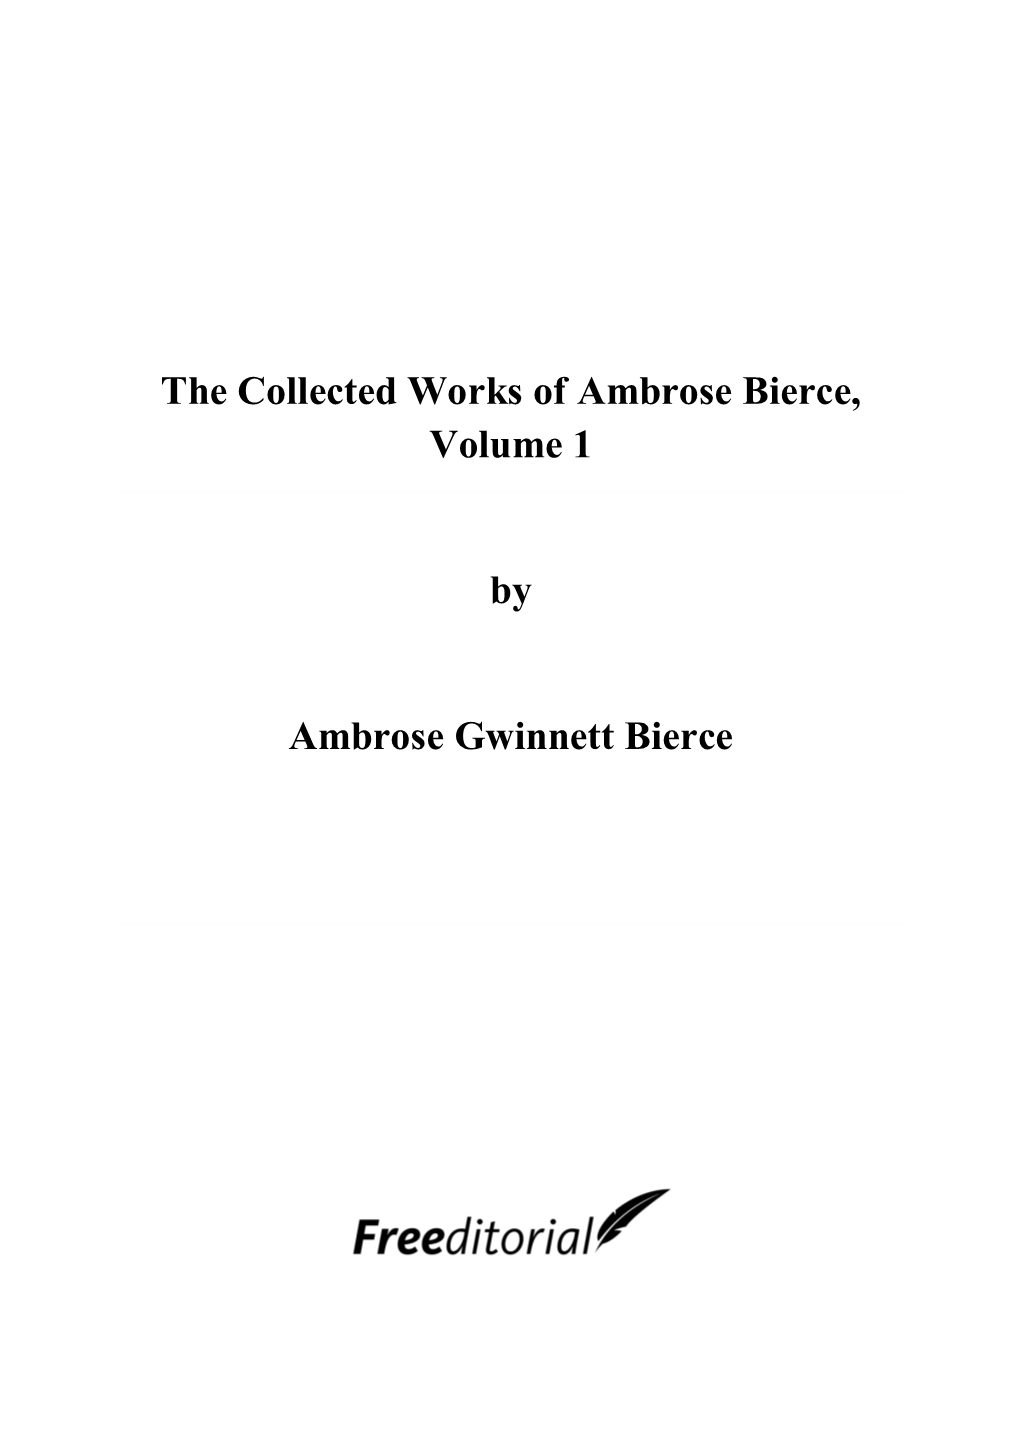 The Collected Works of Ambrose Bierce, Volume 1 by Ambrose